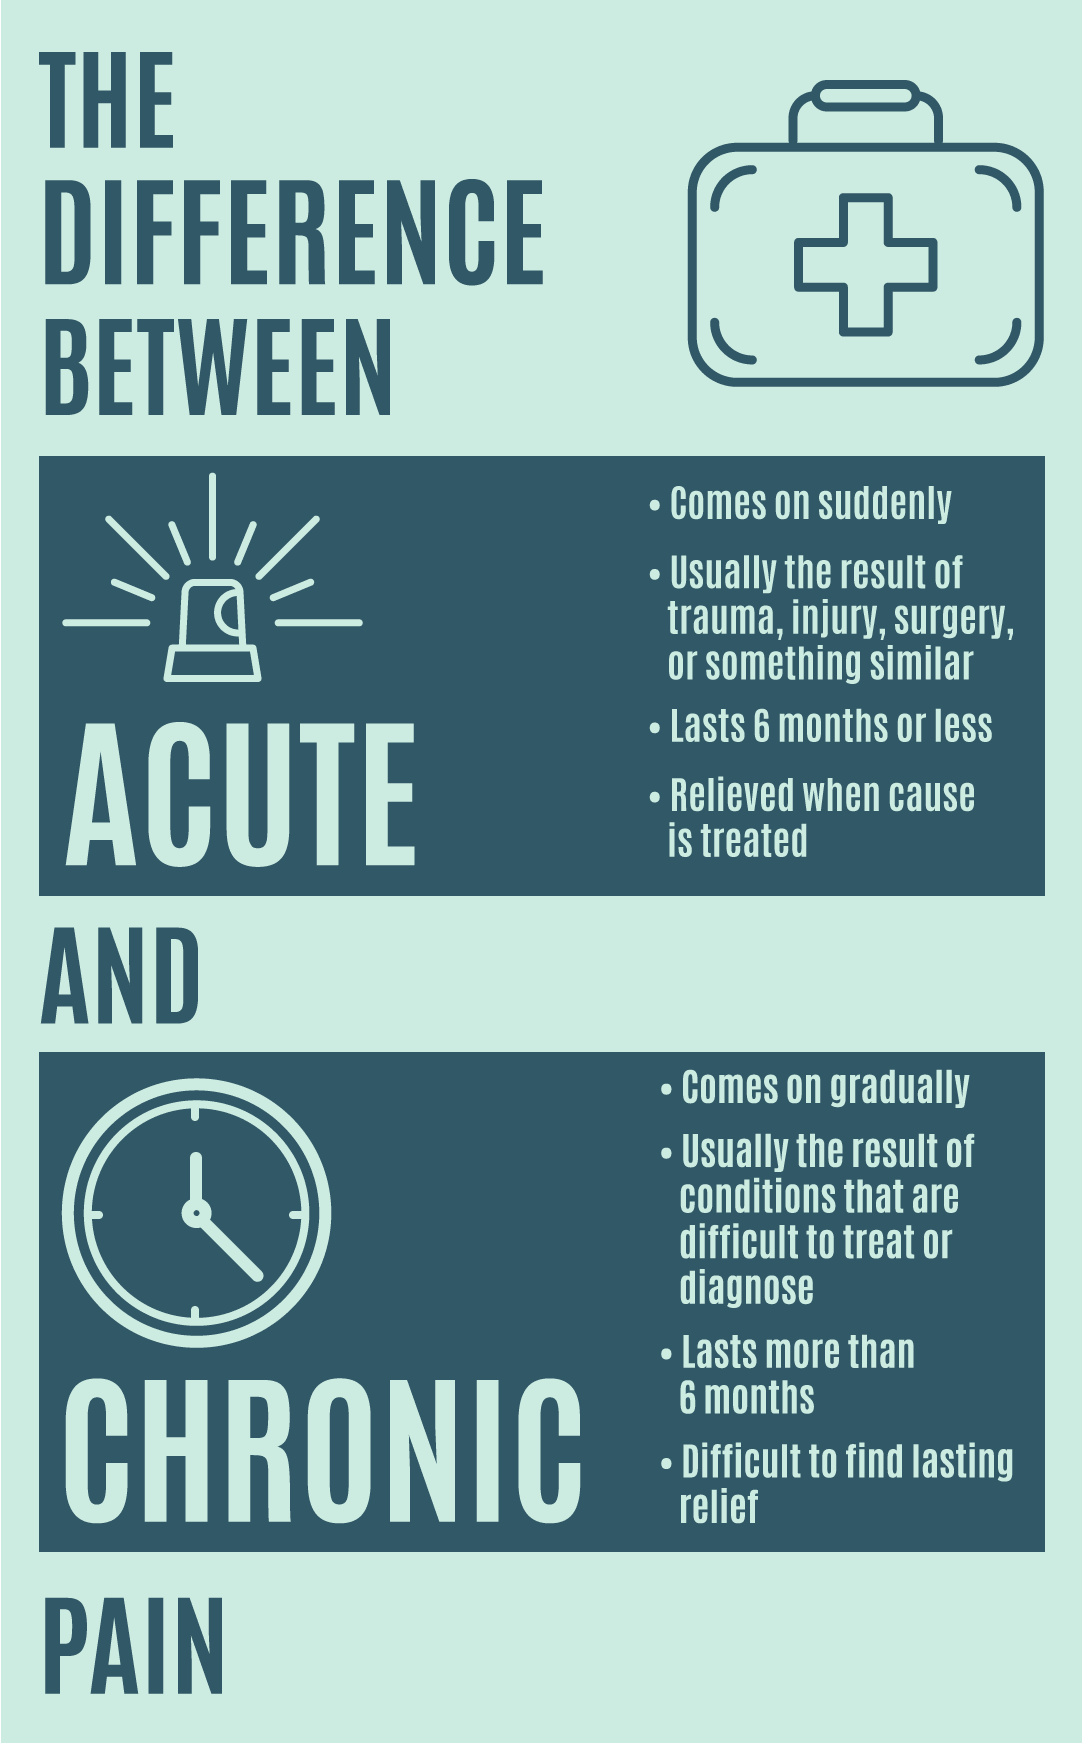 An infographic describing the differences between acute and chronic pain